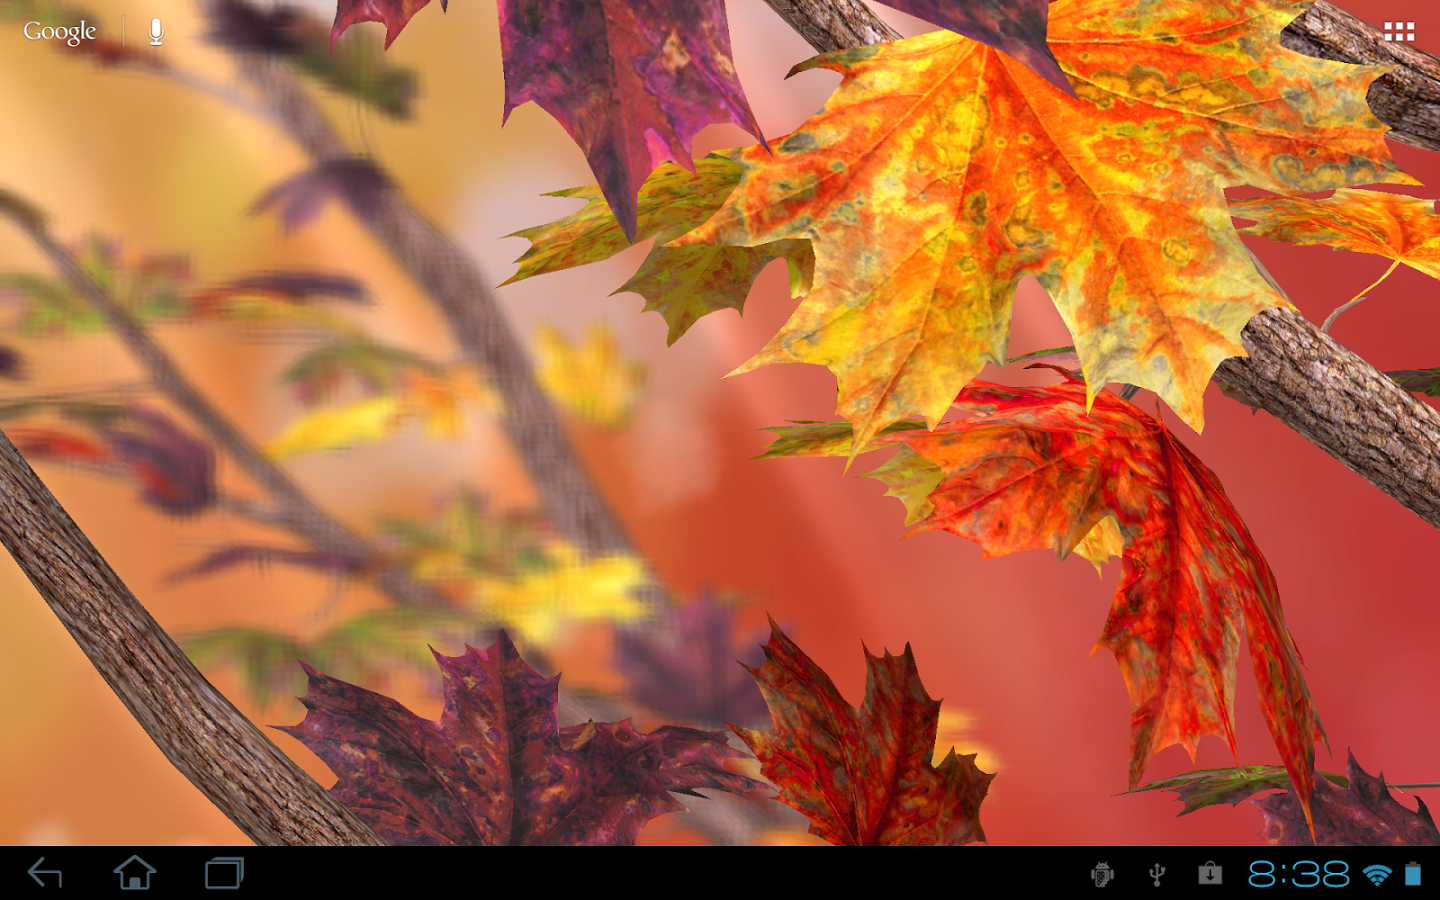 Autumn Tree Wallpaper   Android Apps on Google Play 1440x900